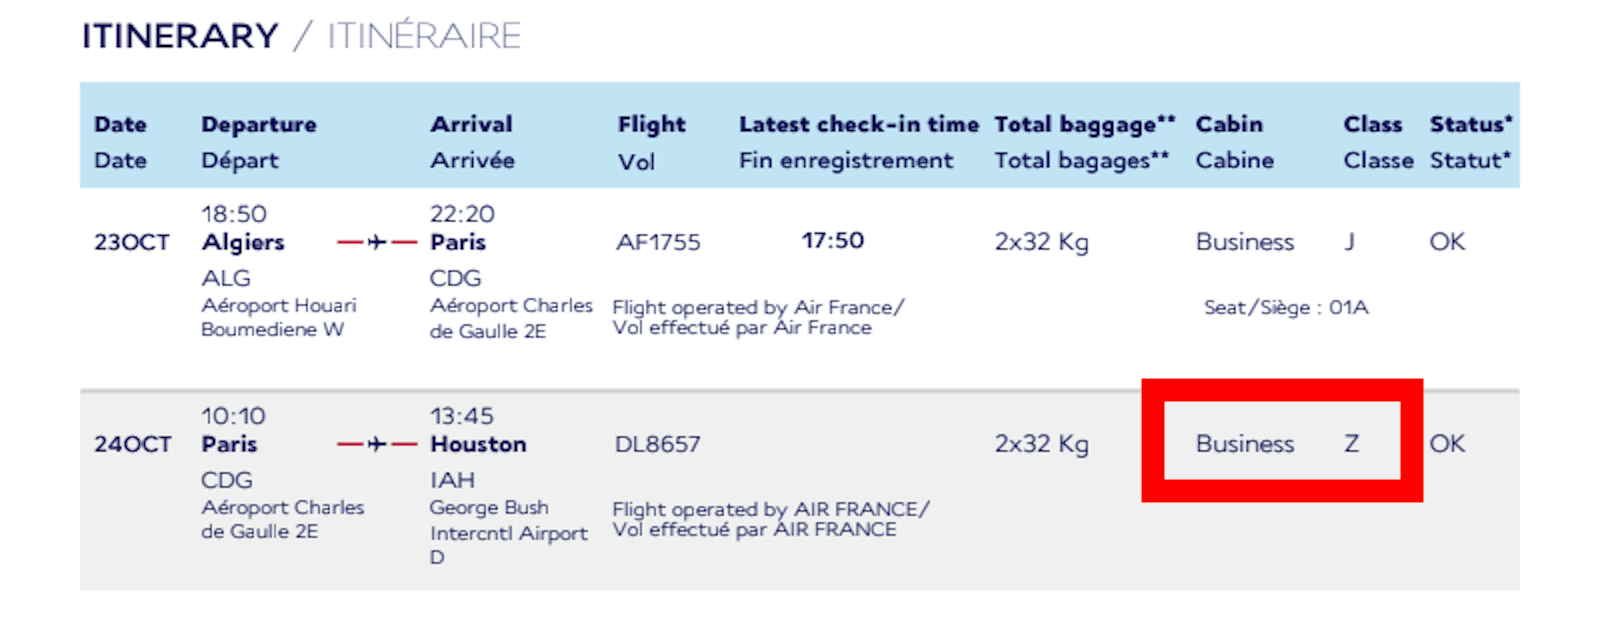 Air France issued new e-tickets, changed from F to Z class